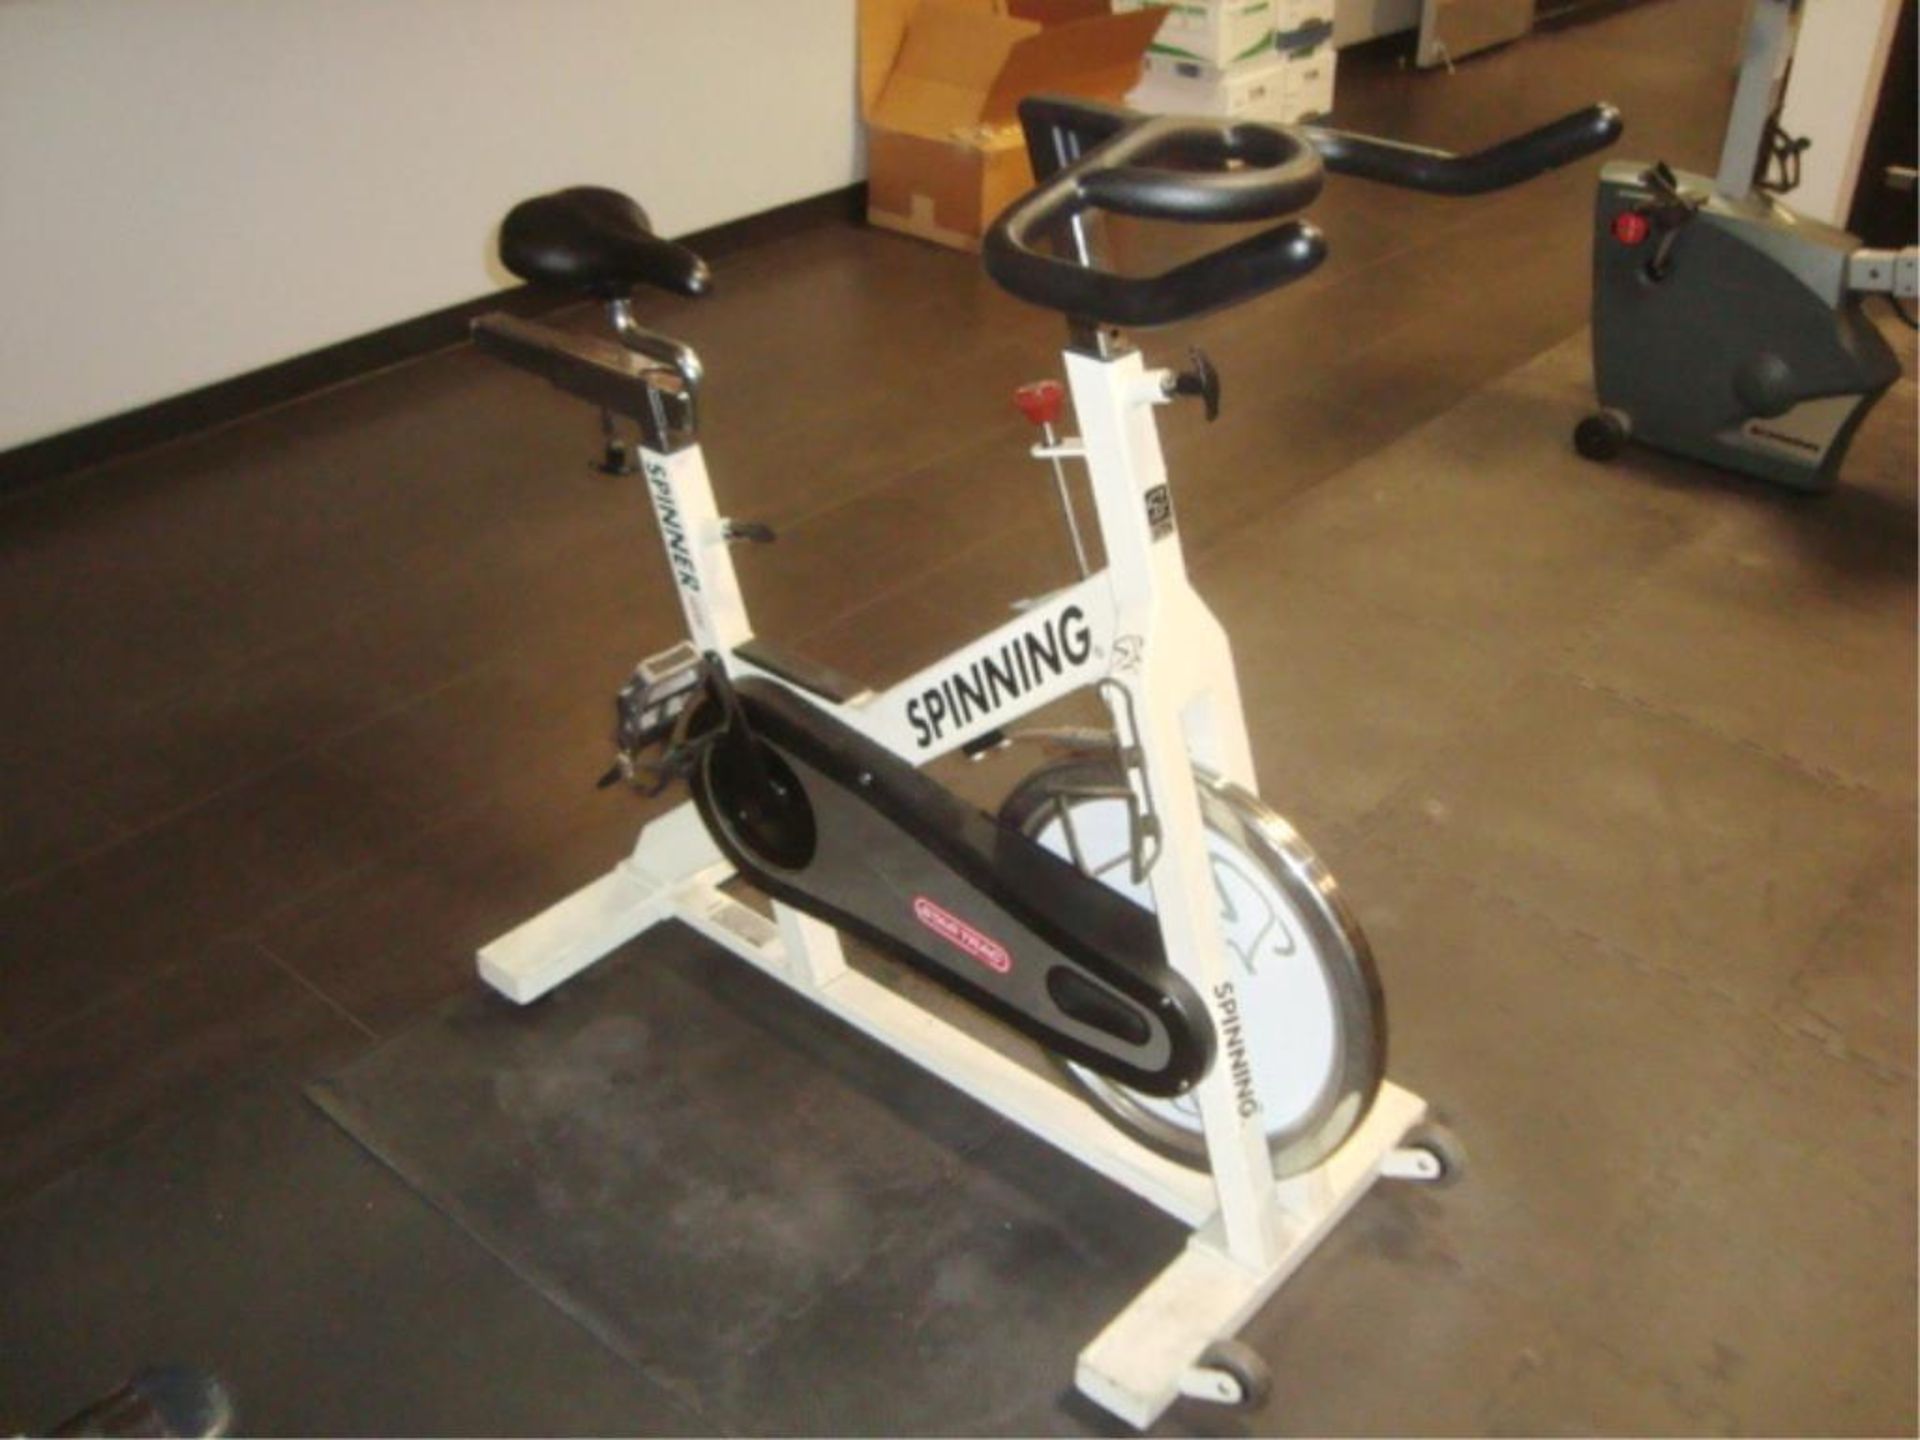 Spinning Exerciser Cycling Machine - Image 3 of 3